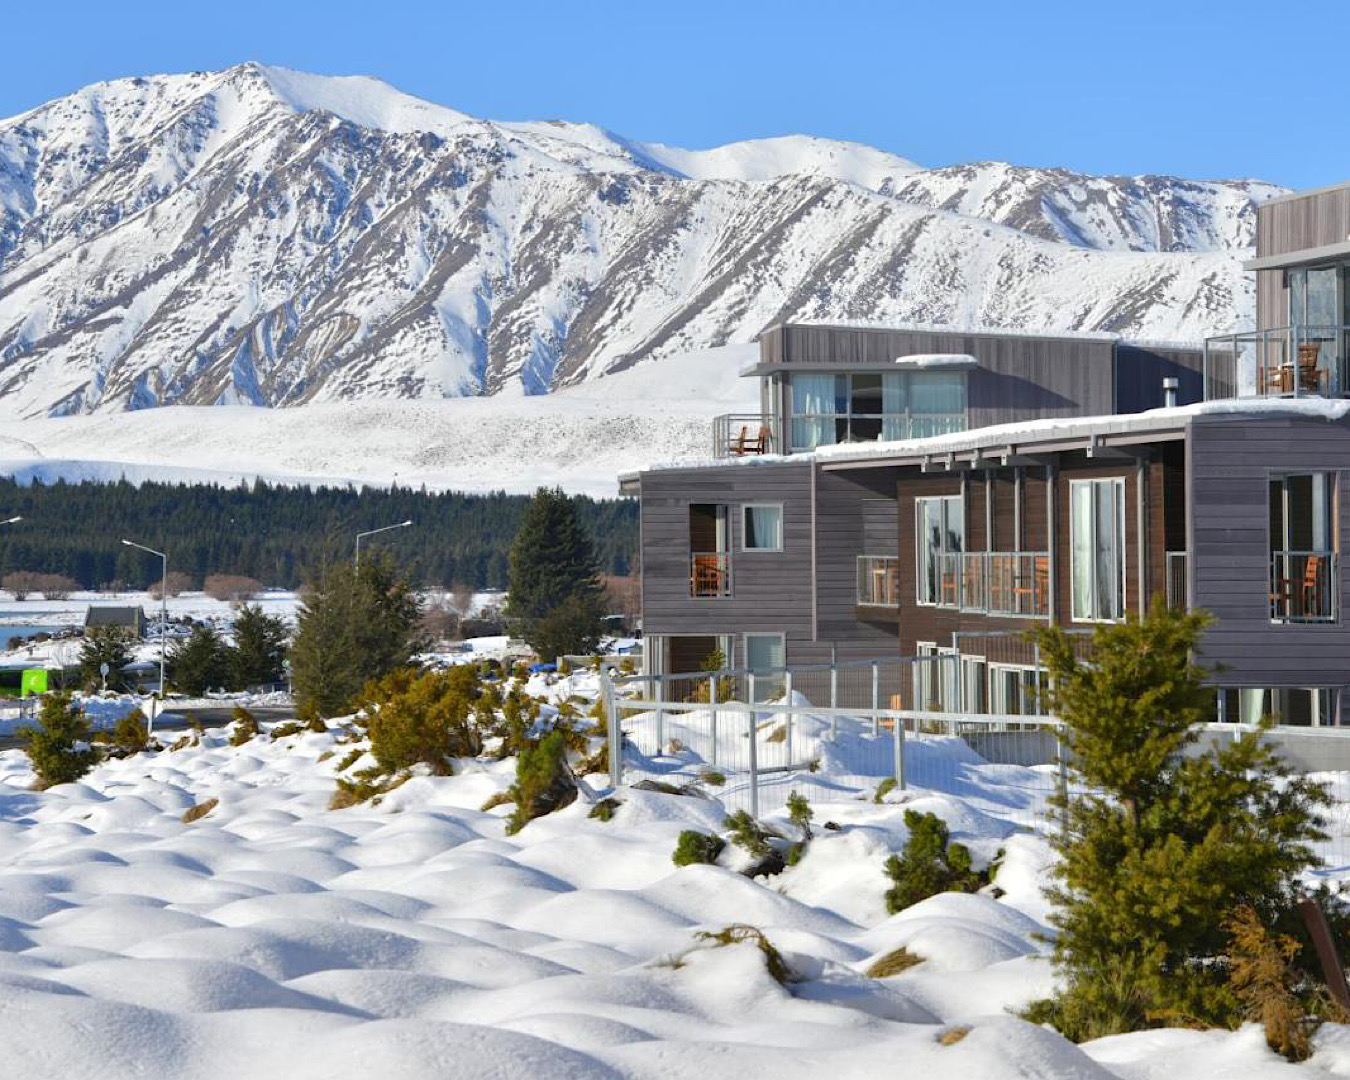 A swanky resort backed by snow-covered mountains in Tekapo. 